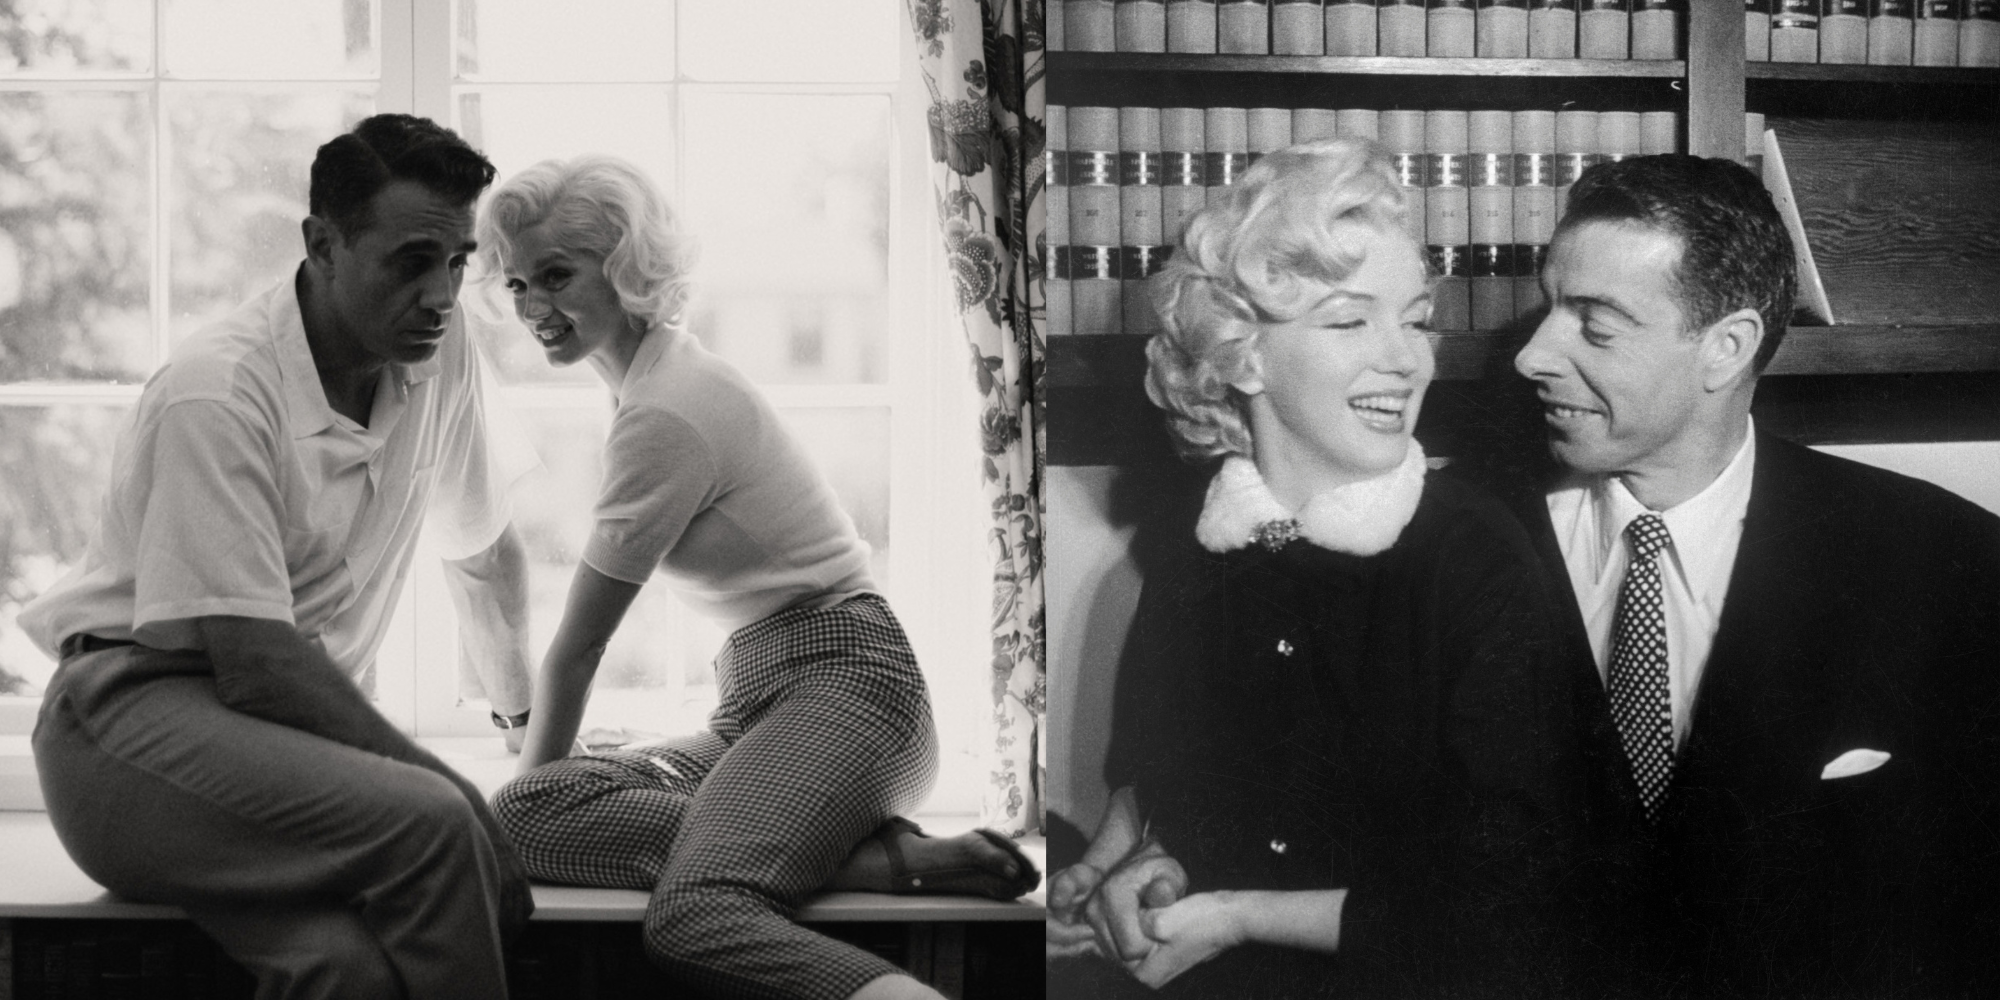 Blonde': The True Story of Arthur Miller's Relationship With Marilyn Monroe